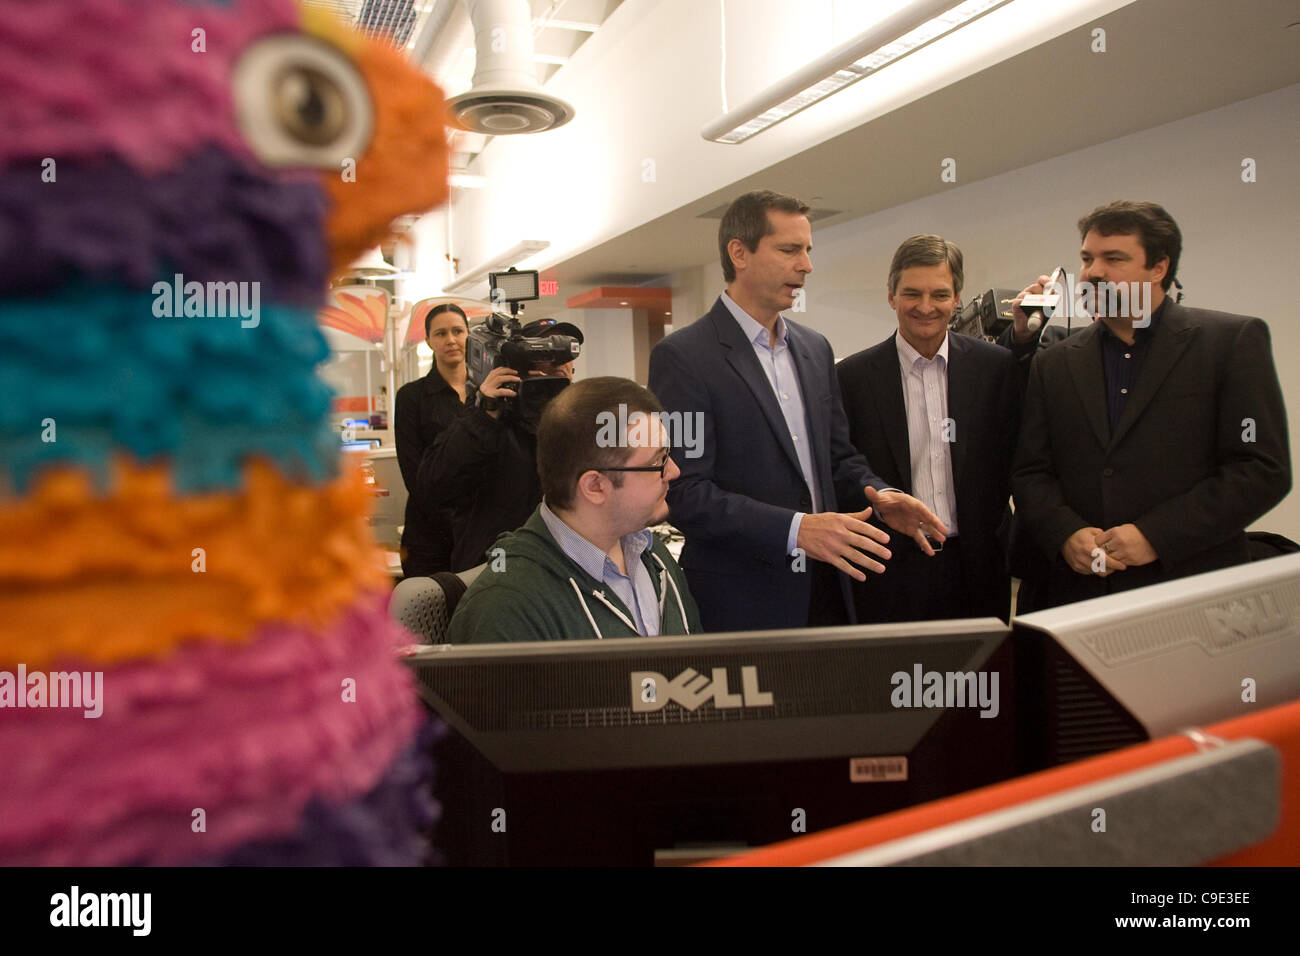 London Ontario, Canada - November 28, 2011. Dalton McGuinty Premier of Ontario speaks with Mukney Tipping, a designer with Digital Extremes (seated) Chris Bentley, MPP for London West, second from right and James Schmalz, president and founder or Digital Extremes, right. McGuinty was touring the off Stock Photo